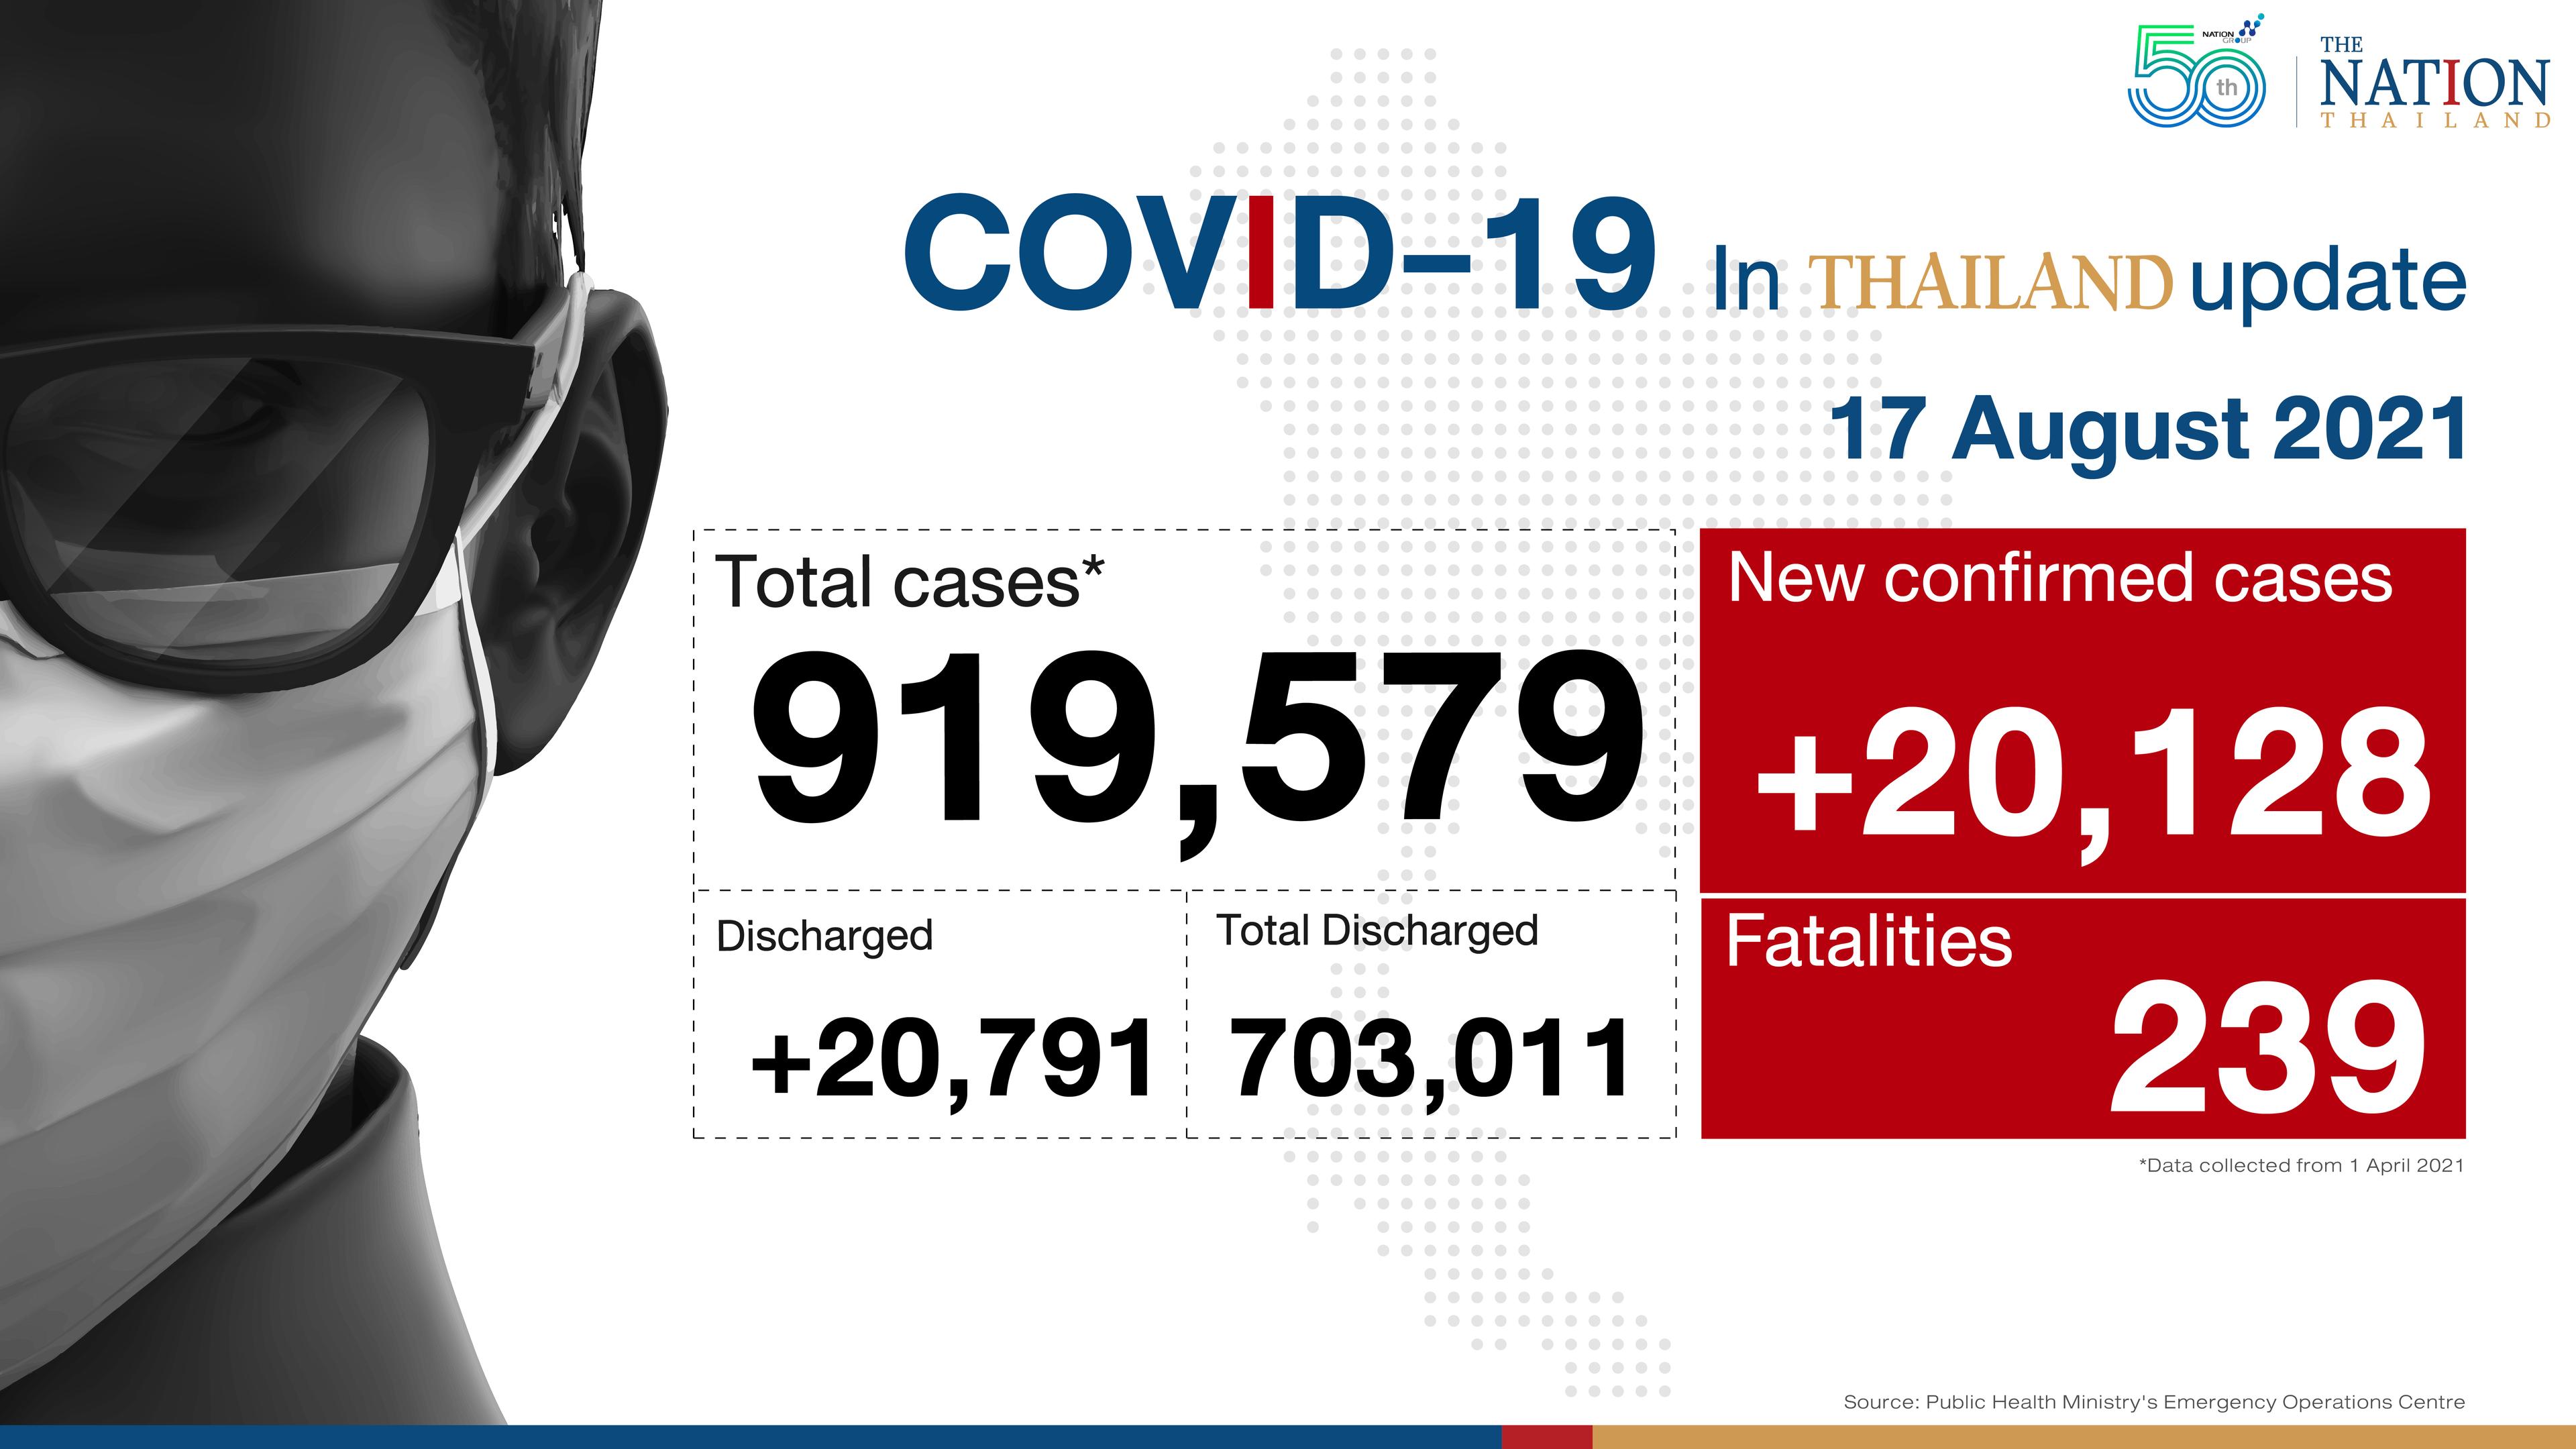 Thailand hits new record with 239 deaths, 20,128 infections